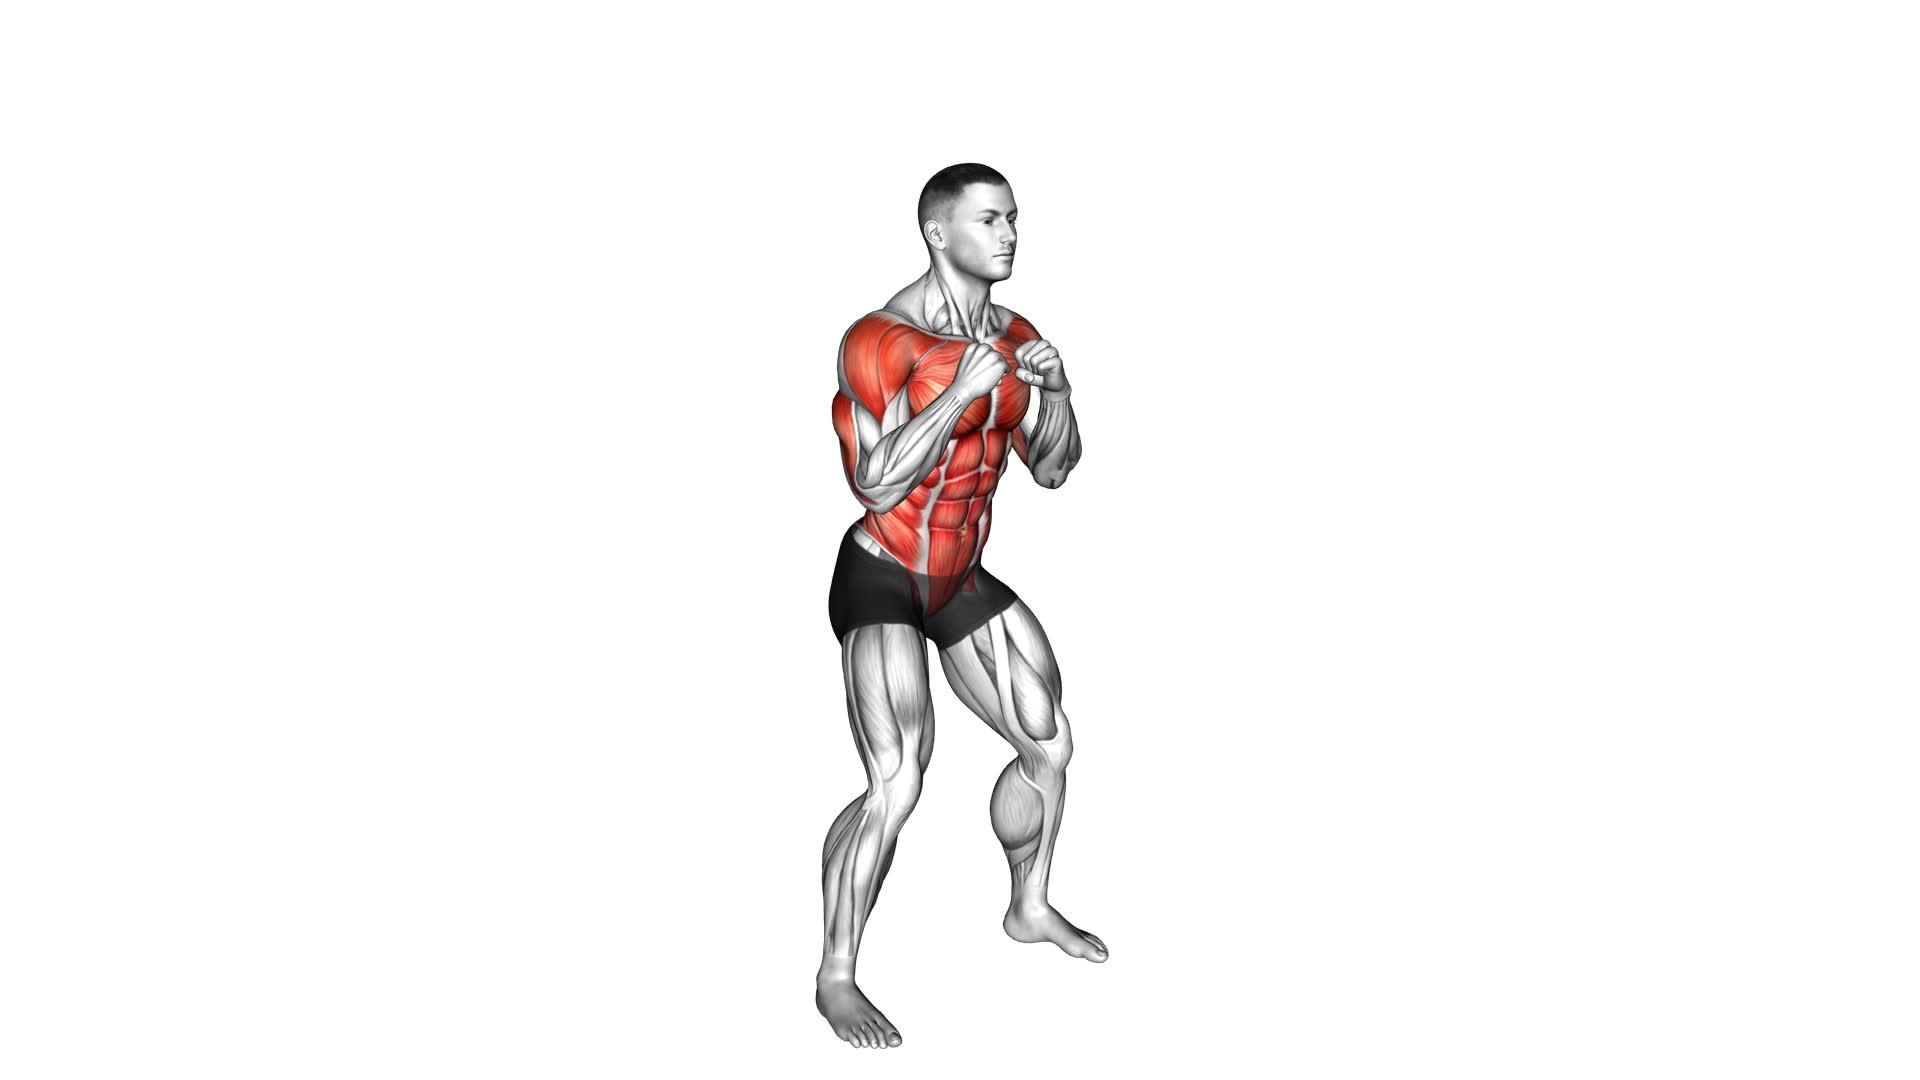 Standing Top Corner Punch (male) - Video Exercise Guide & Tips